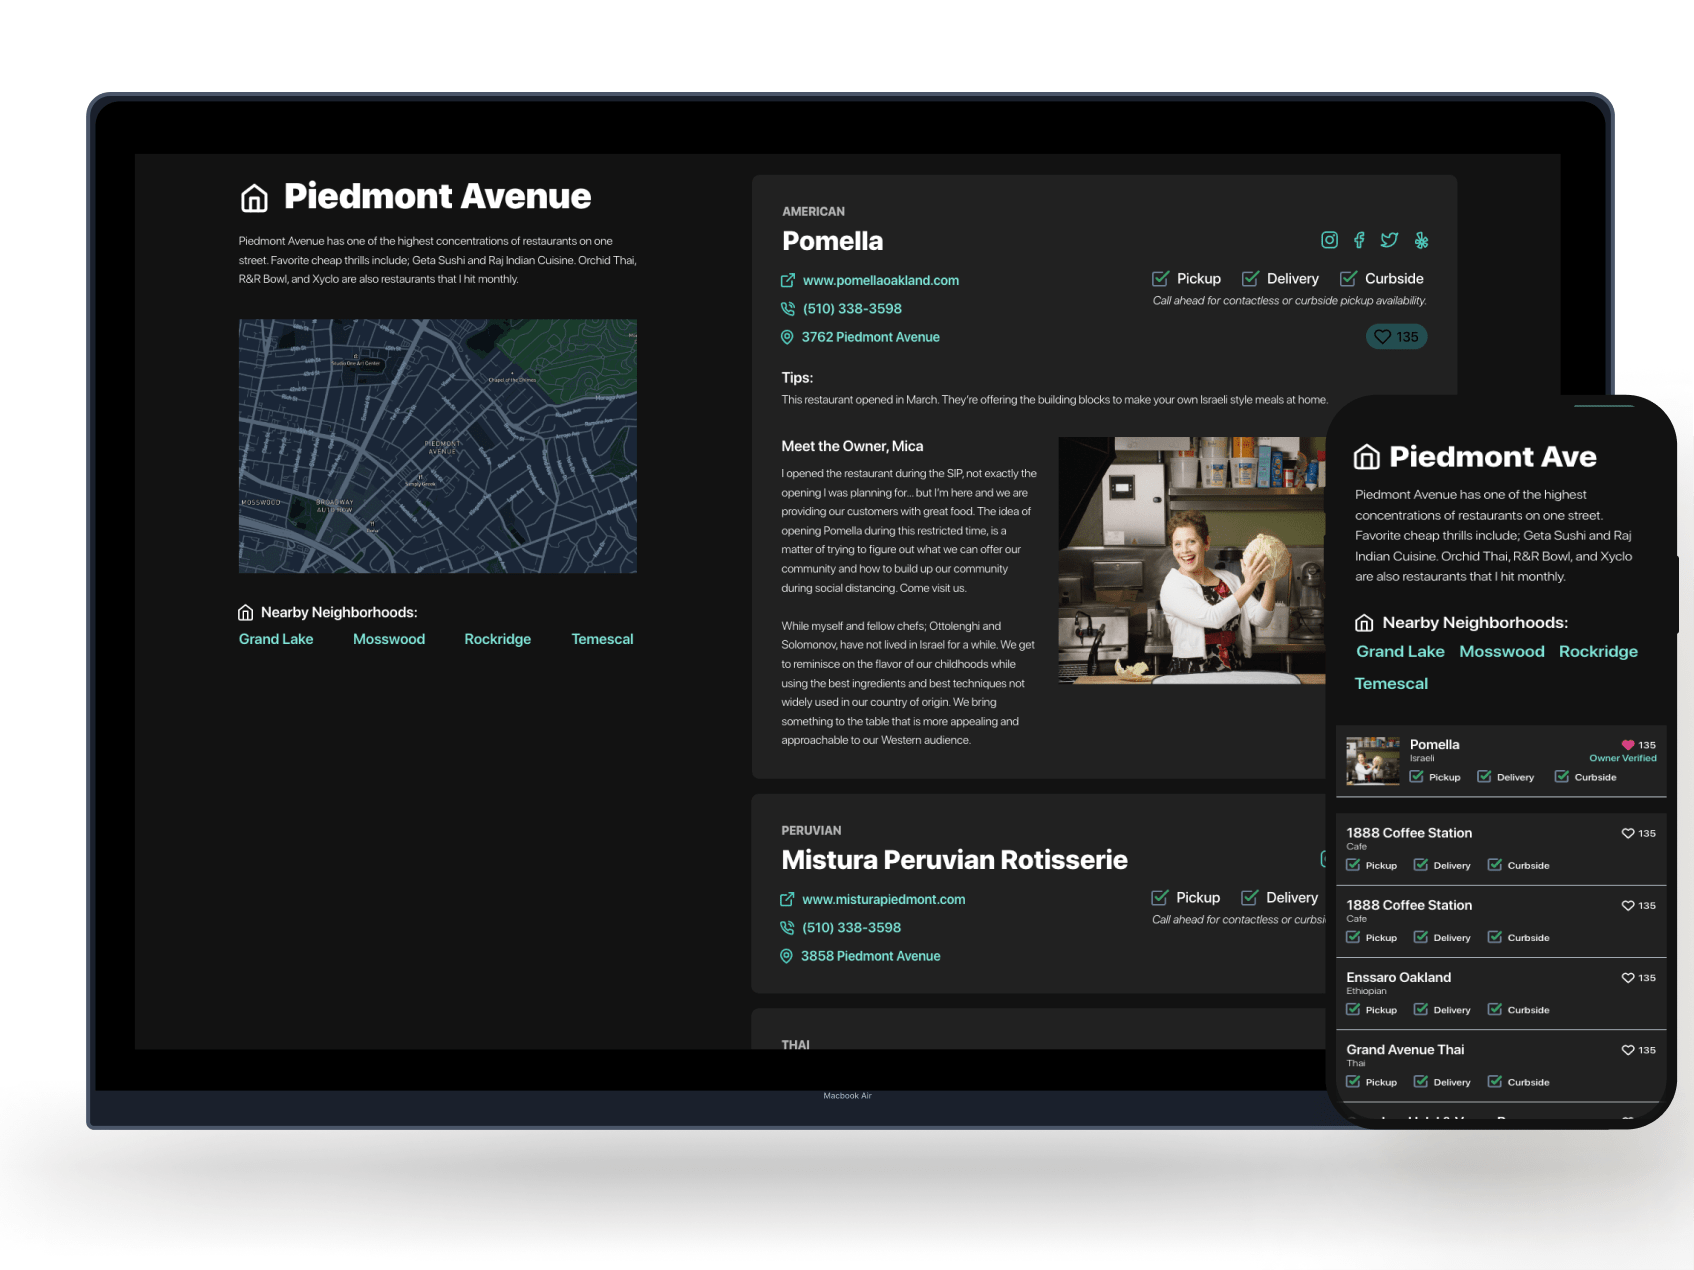 Dark mode high-fidelity mockup focused on a new restaurant that opened during Covid lockdown